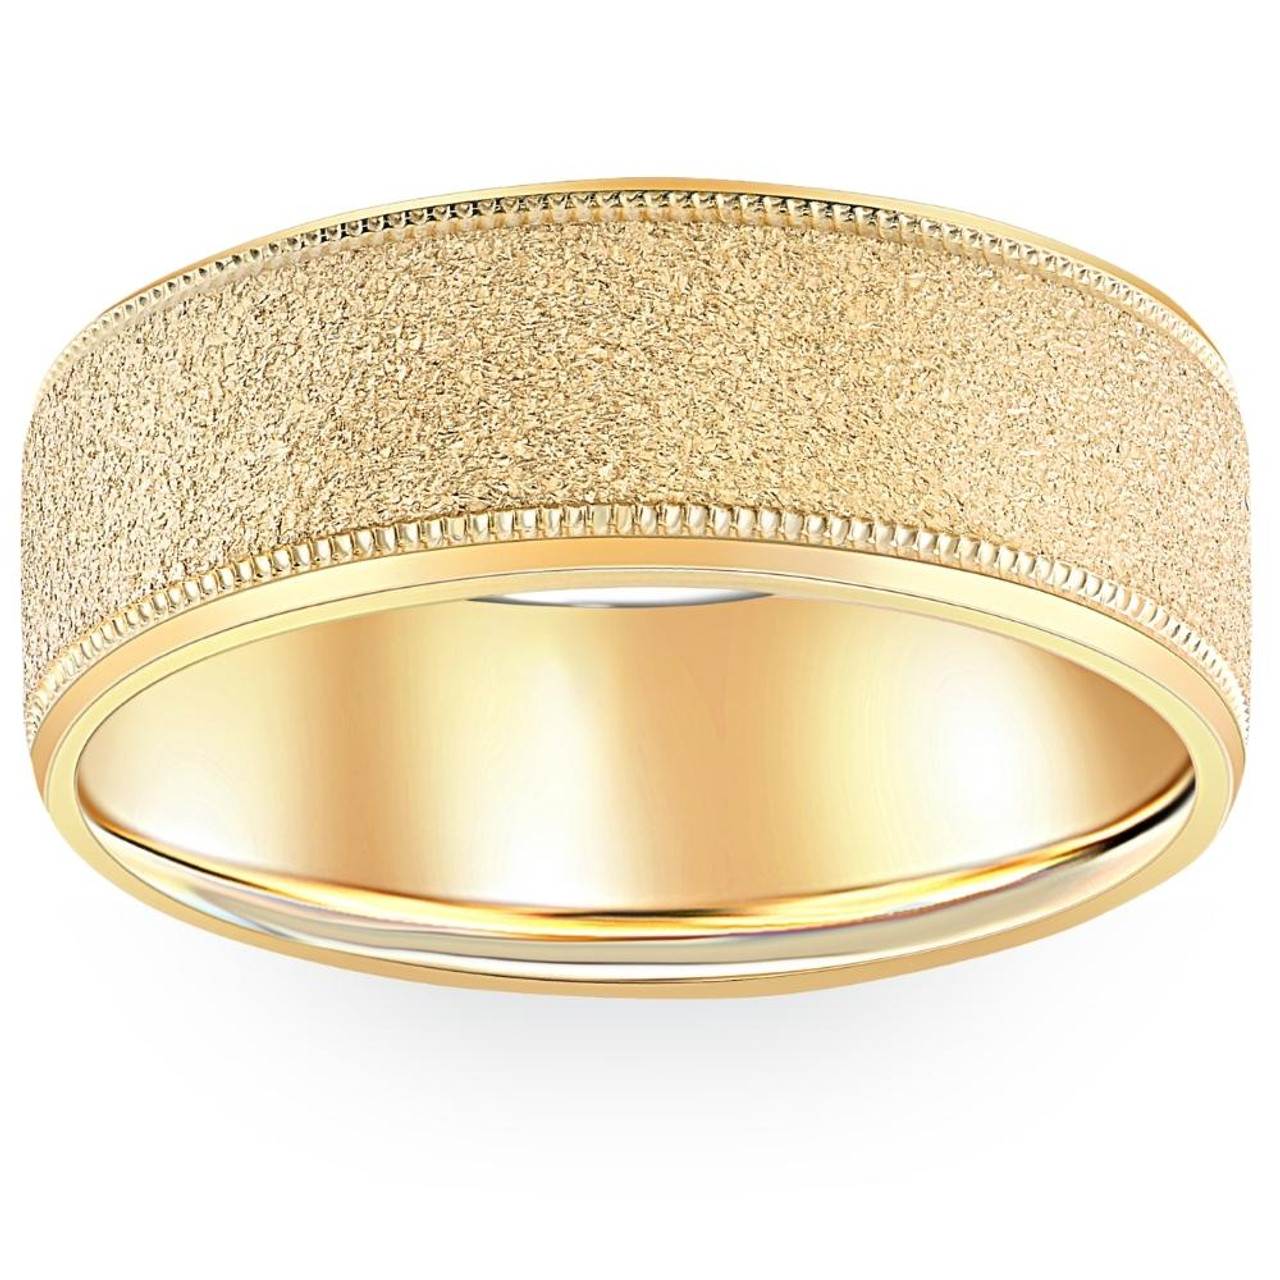 Designer 8 mm Domed Milgrain Polished Finish with Comfort-fit 10K Yellow  Gold Wedding Band - MB1046 – Mens Wedding Rings